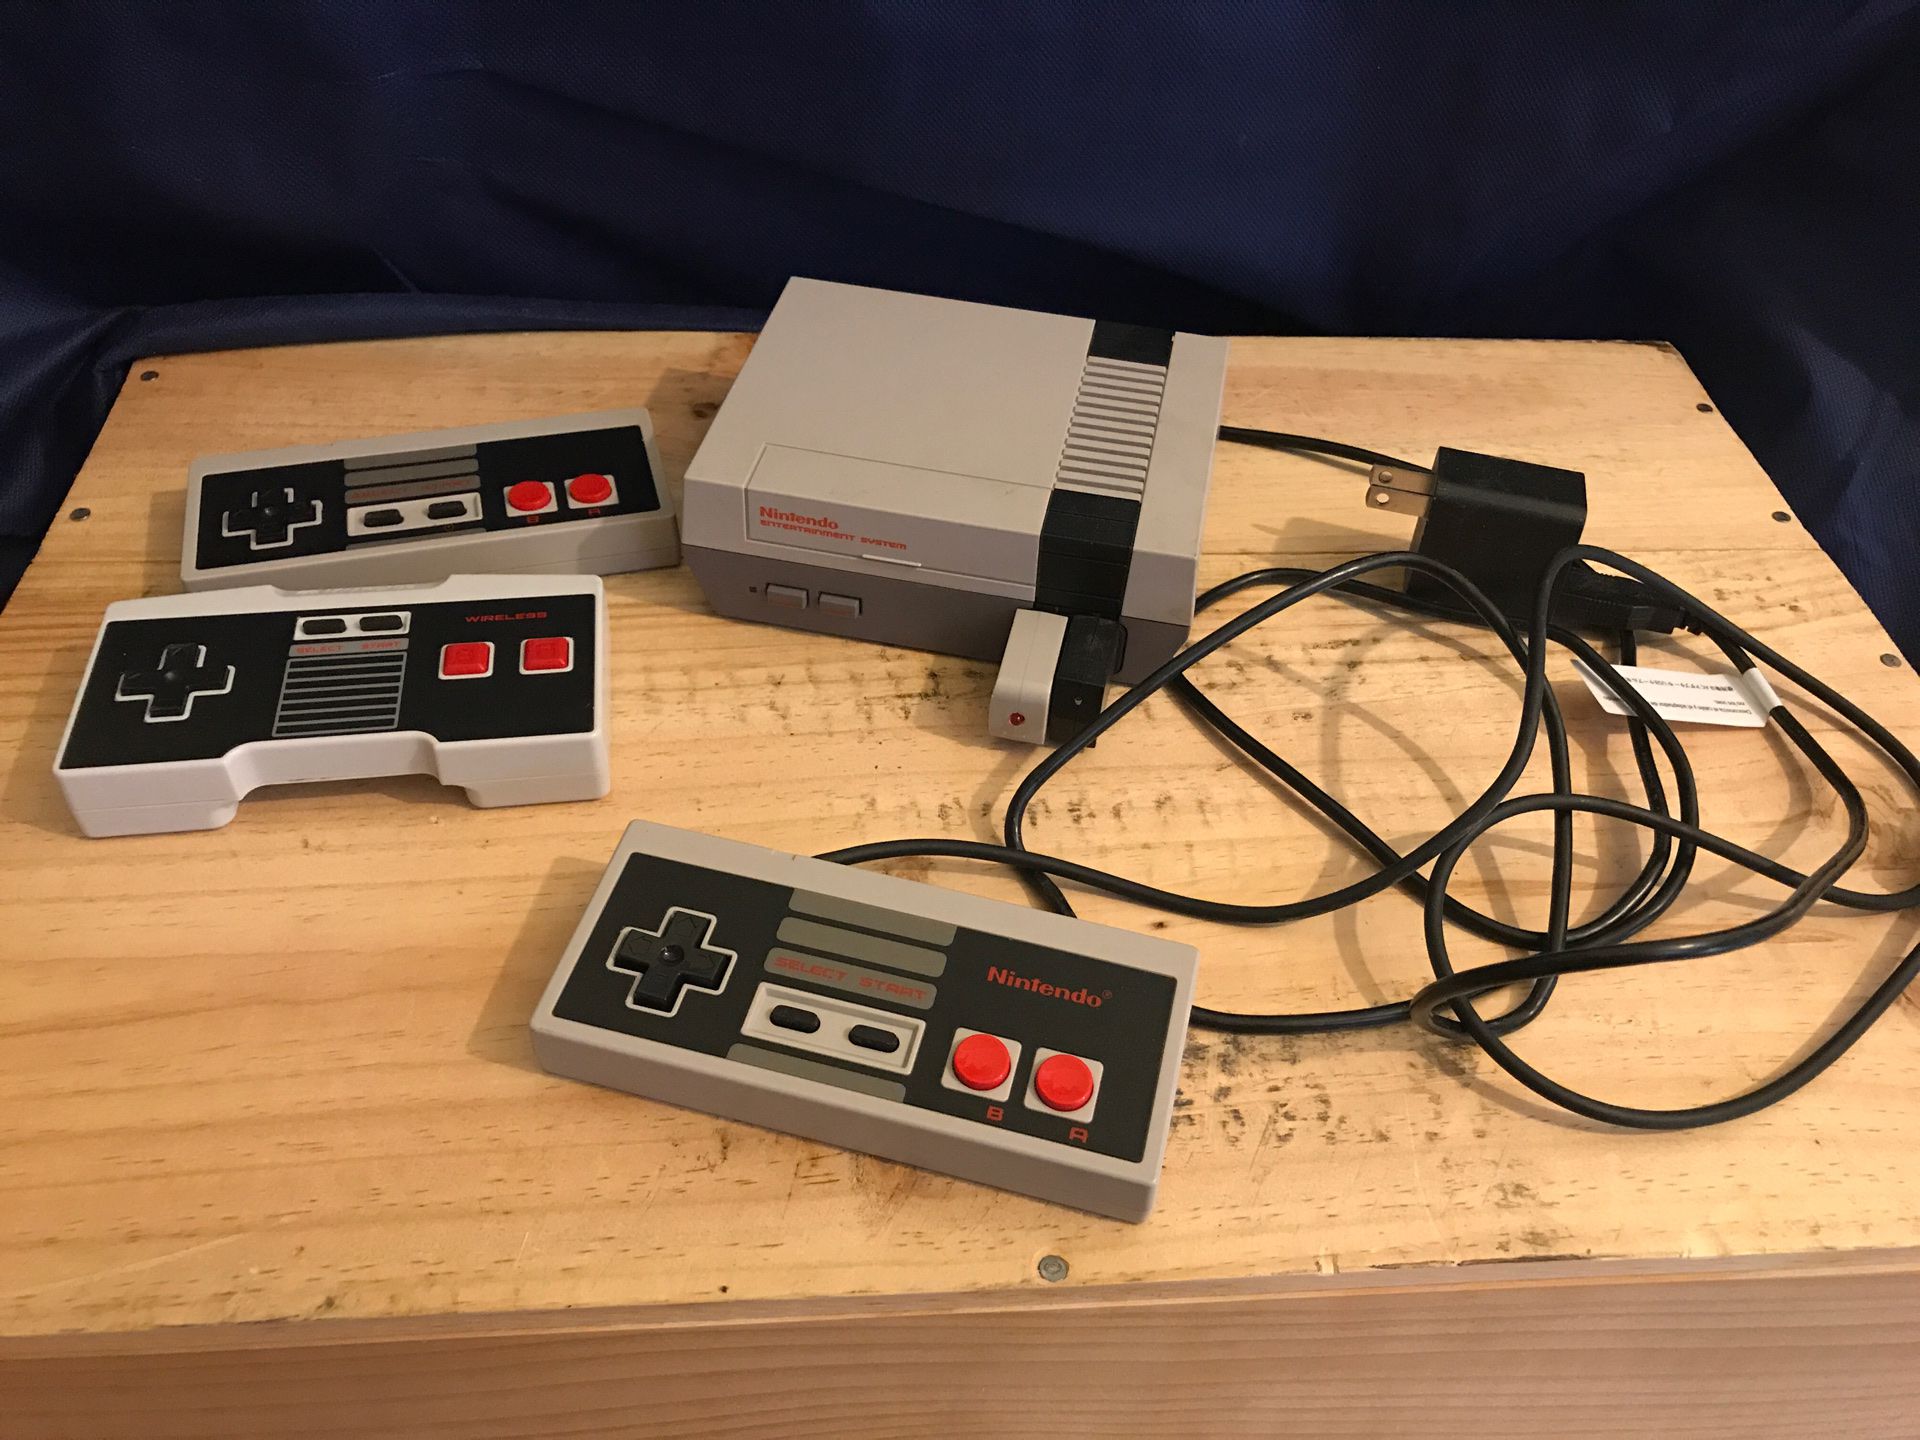 Authentic Nes Classic with extras